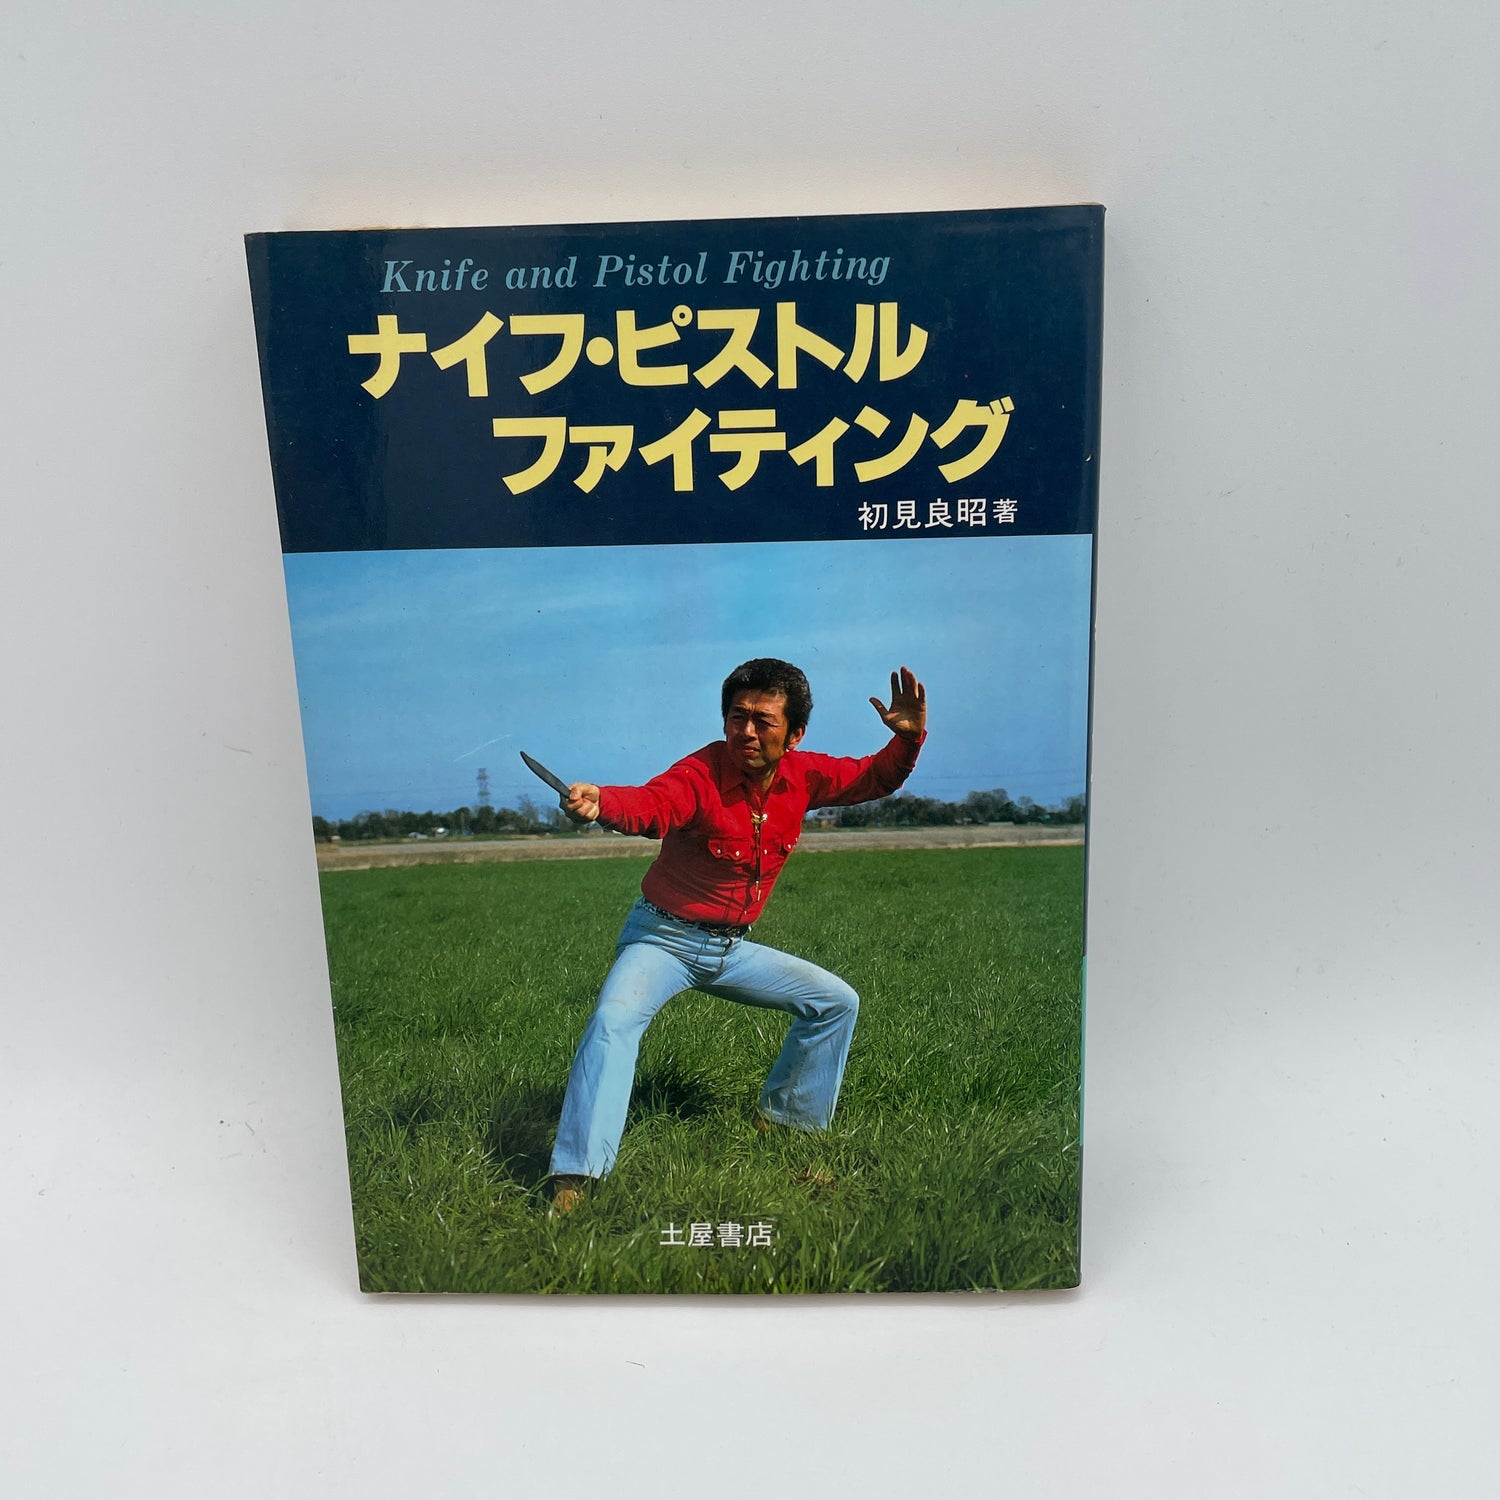 Knife & Pistol Fighting Book by Masaaki Hatsumi (Preowned)